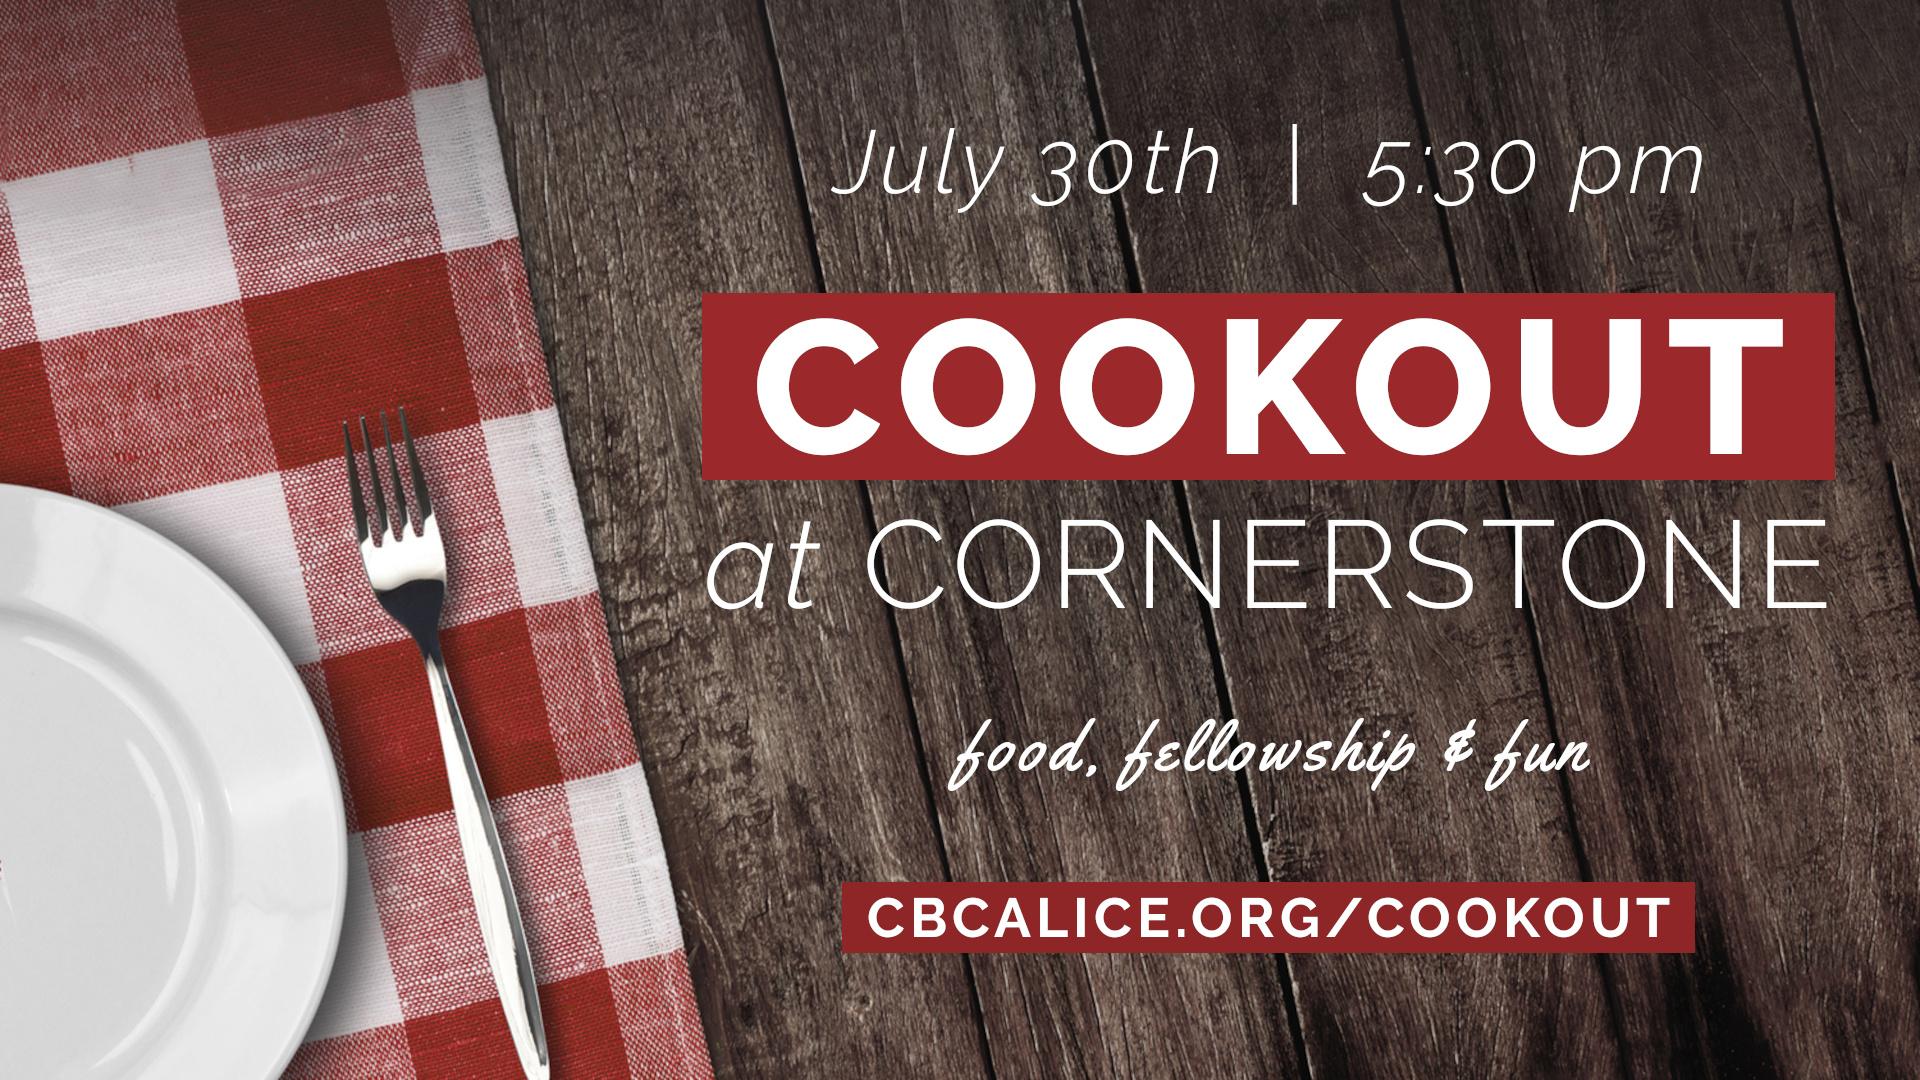 First annual Cookout at Cornerstone on July 30, 2023, at 5:30 pm